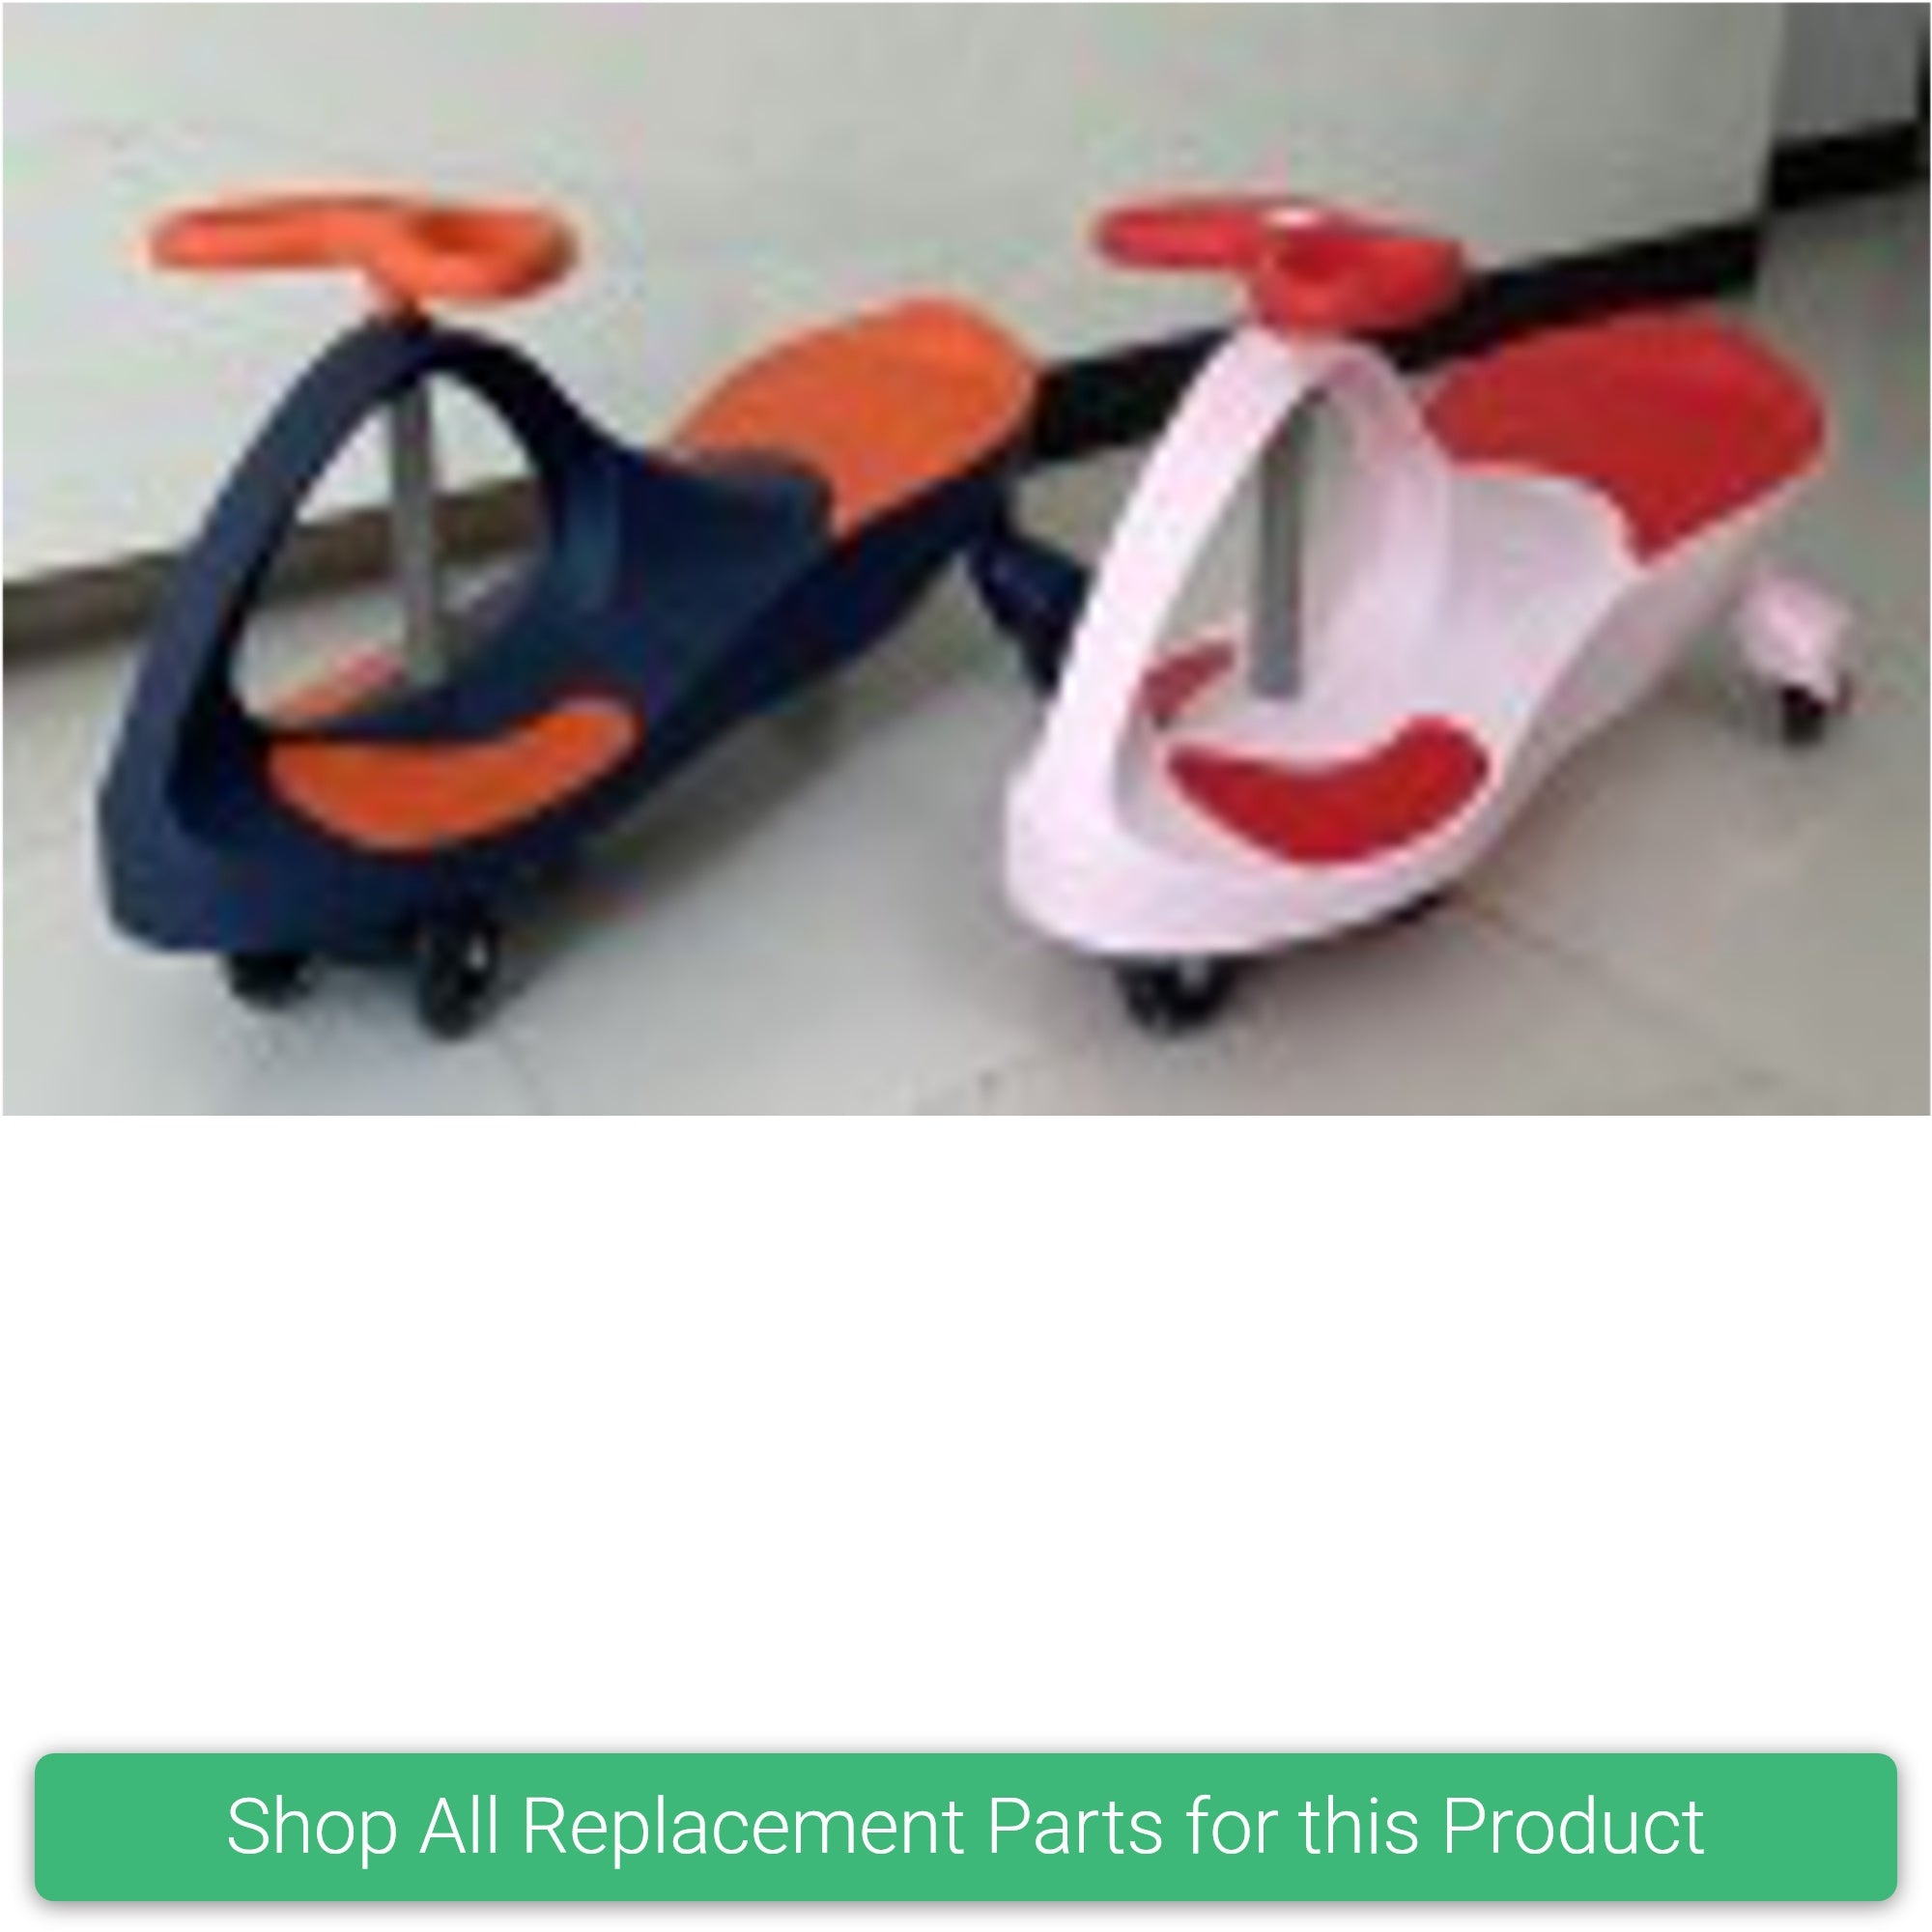 Replacement Parts and Spares for Kids Foot Swing Car  - SWNG-F21-VARI - FX-N201